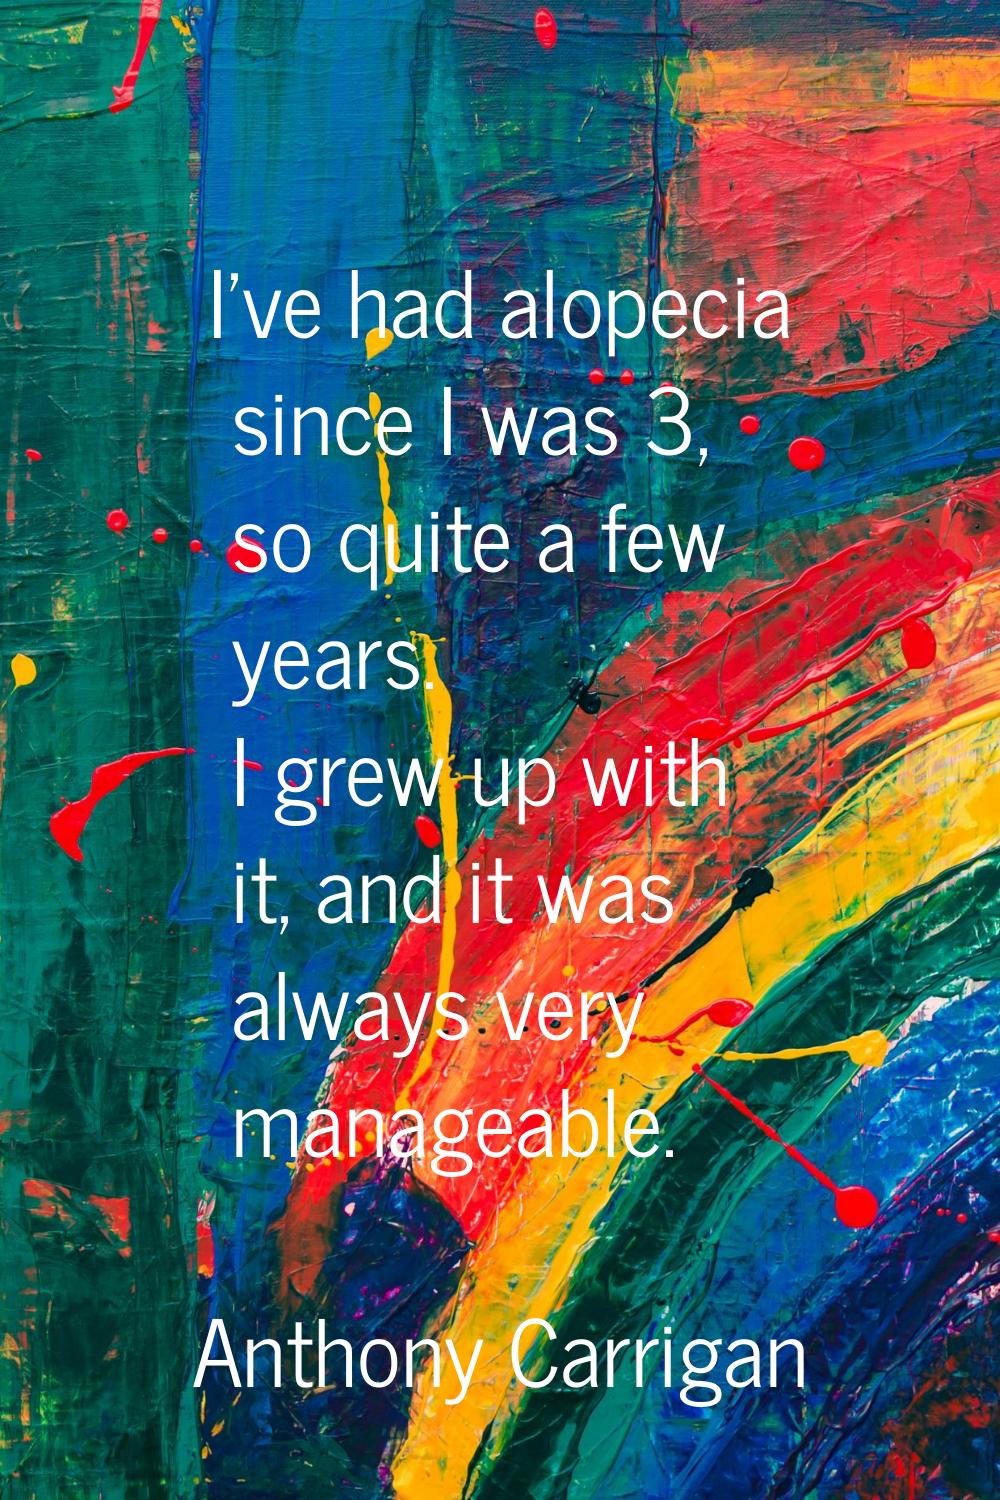 I've had alopecia since I was 3, so quite a few years. I grew up with it, and it was always very ma